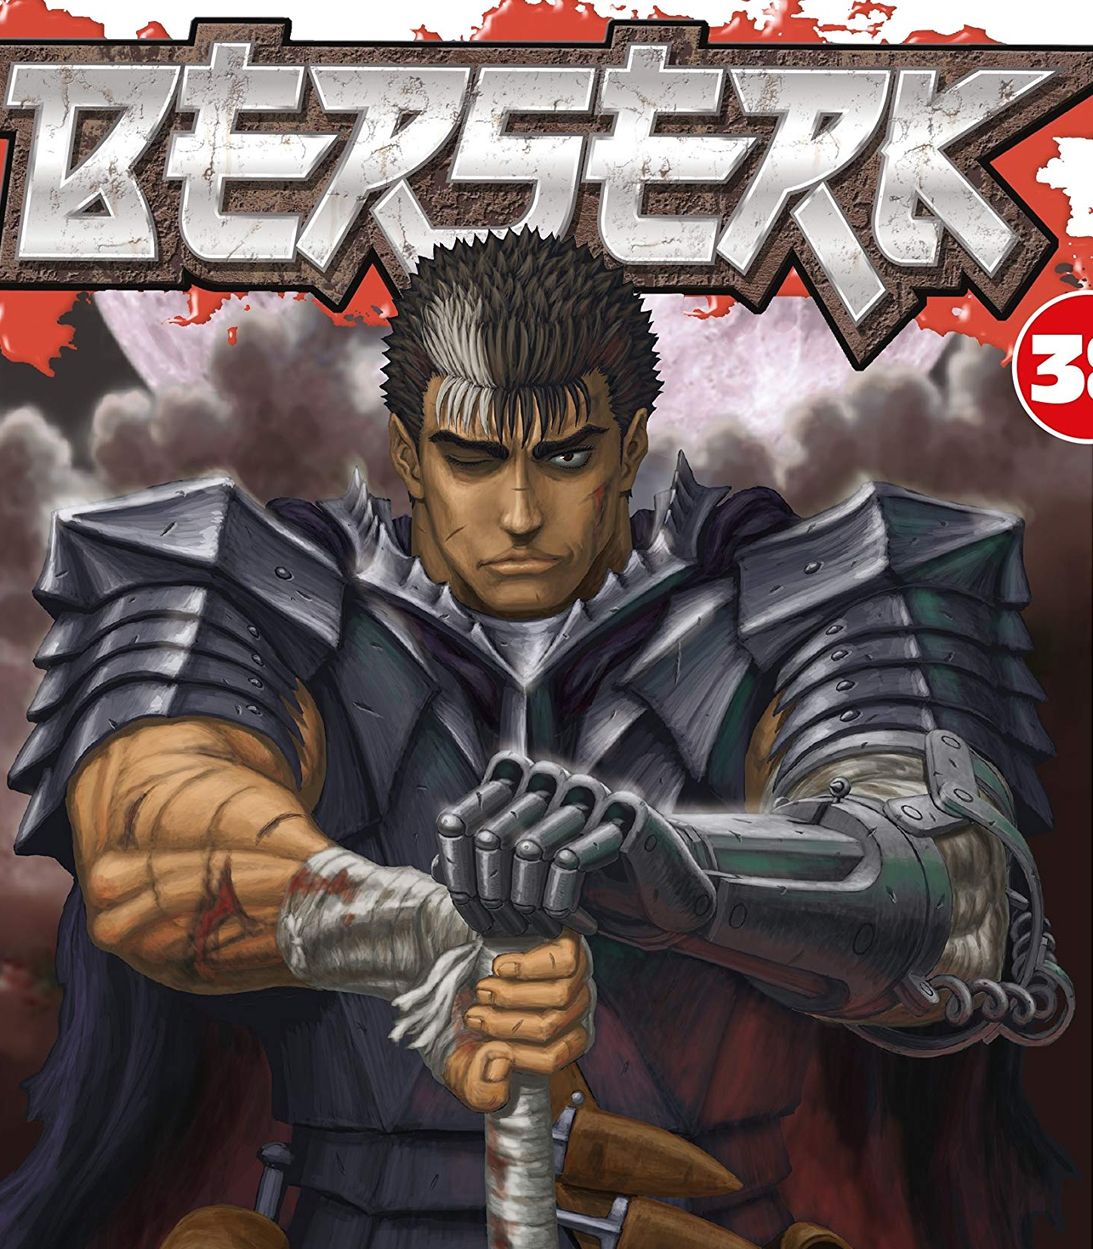 Manga cover for Berserk Volume 38 featuring Guts with a sword